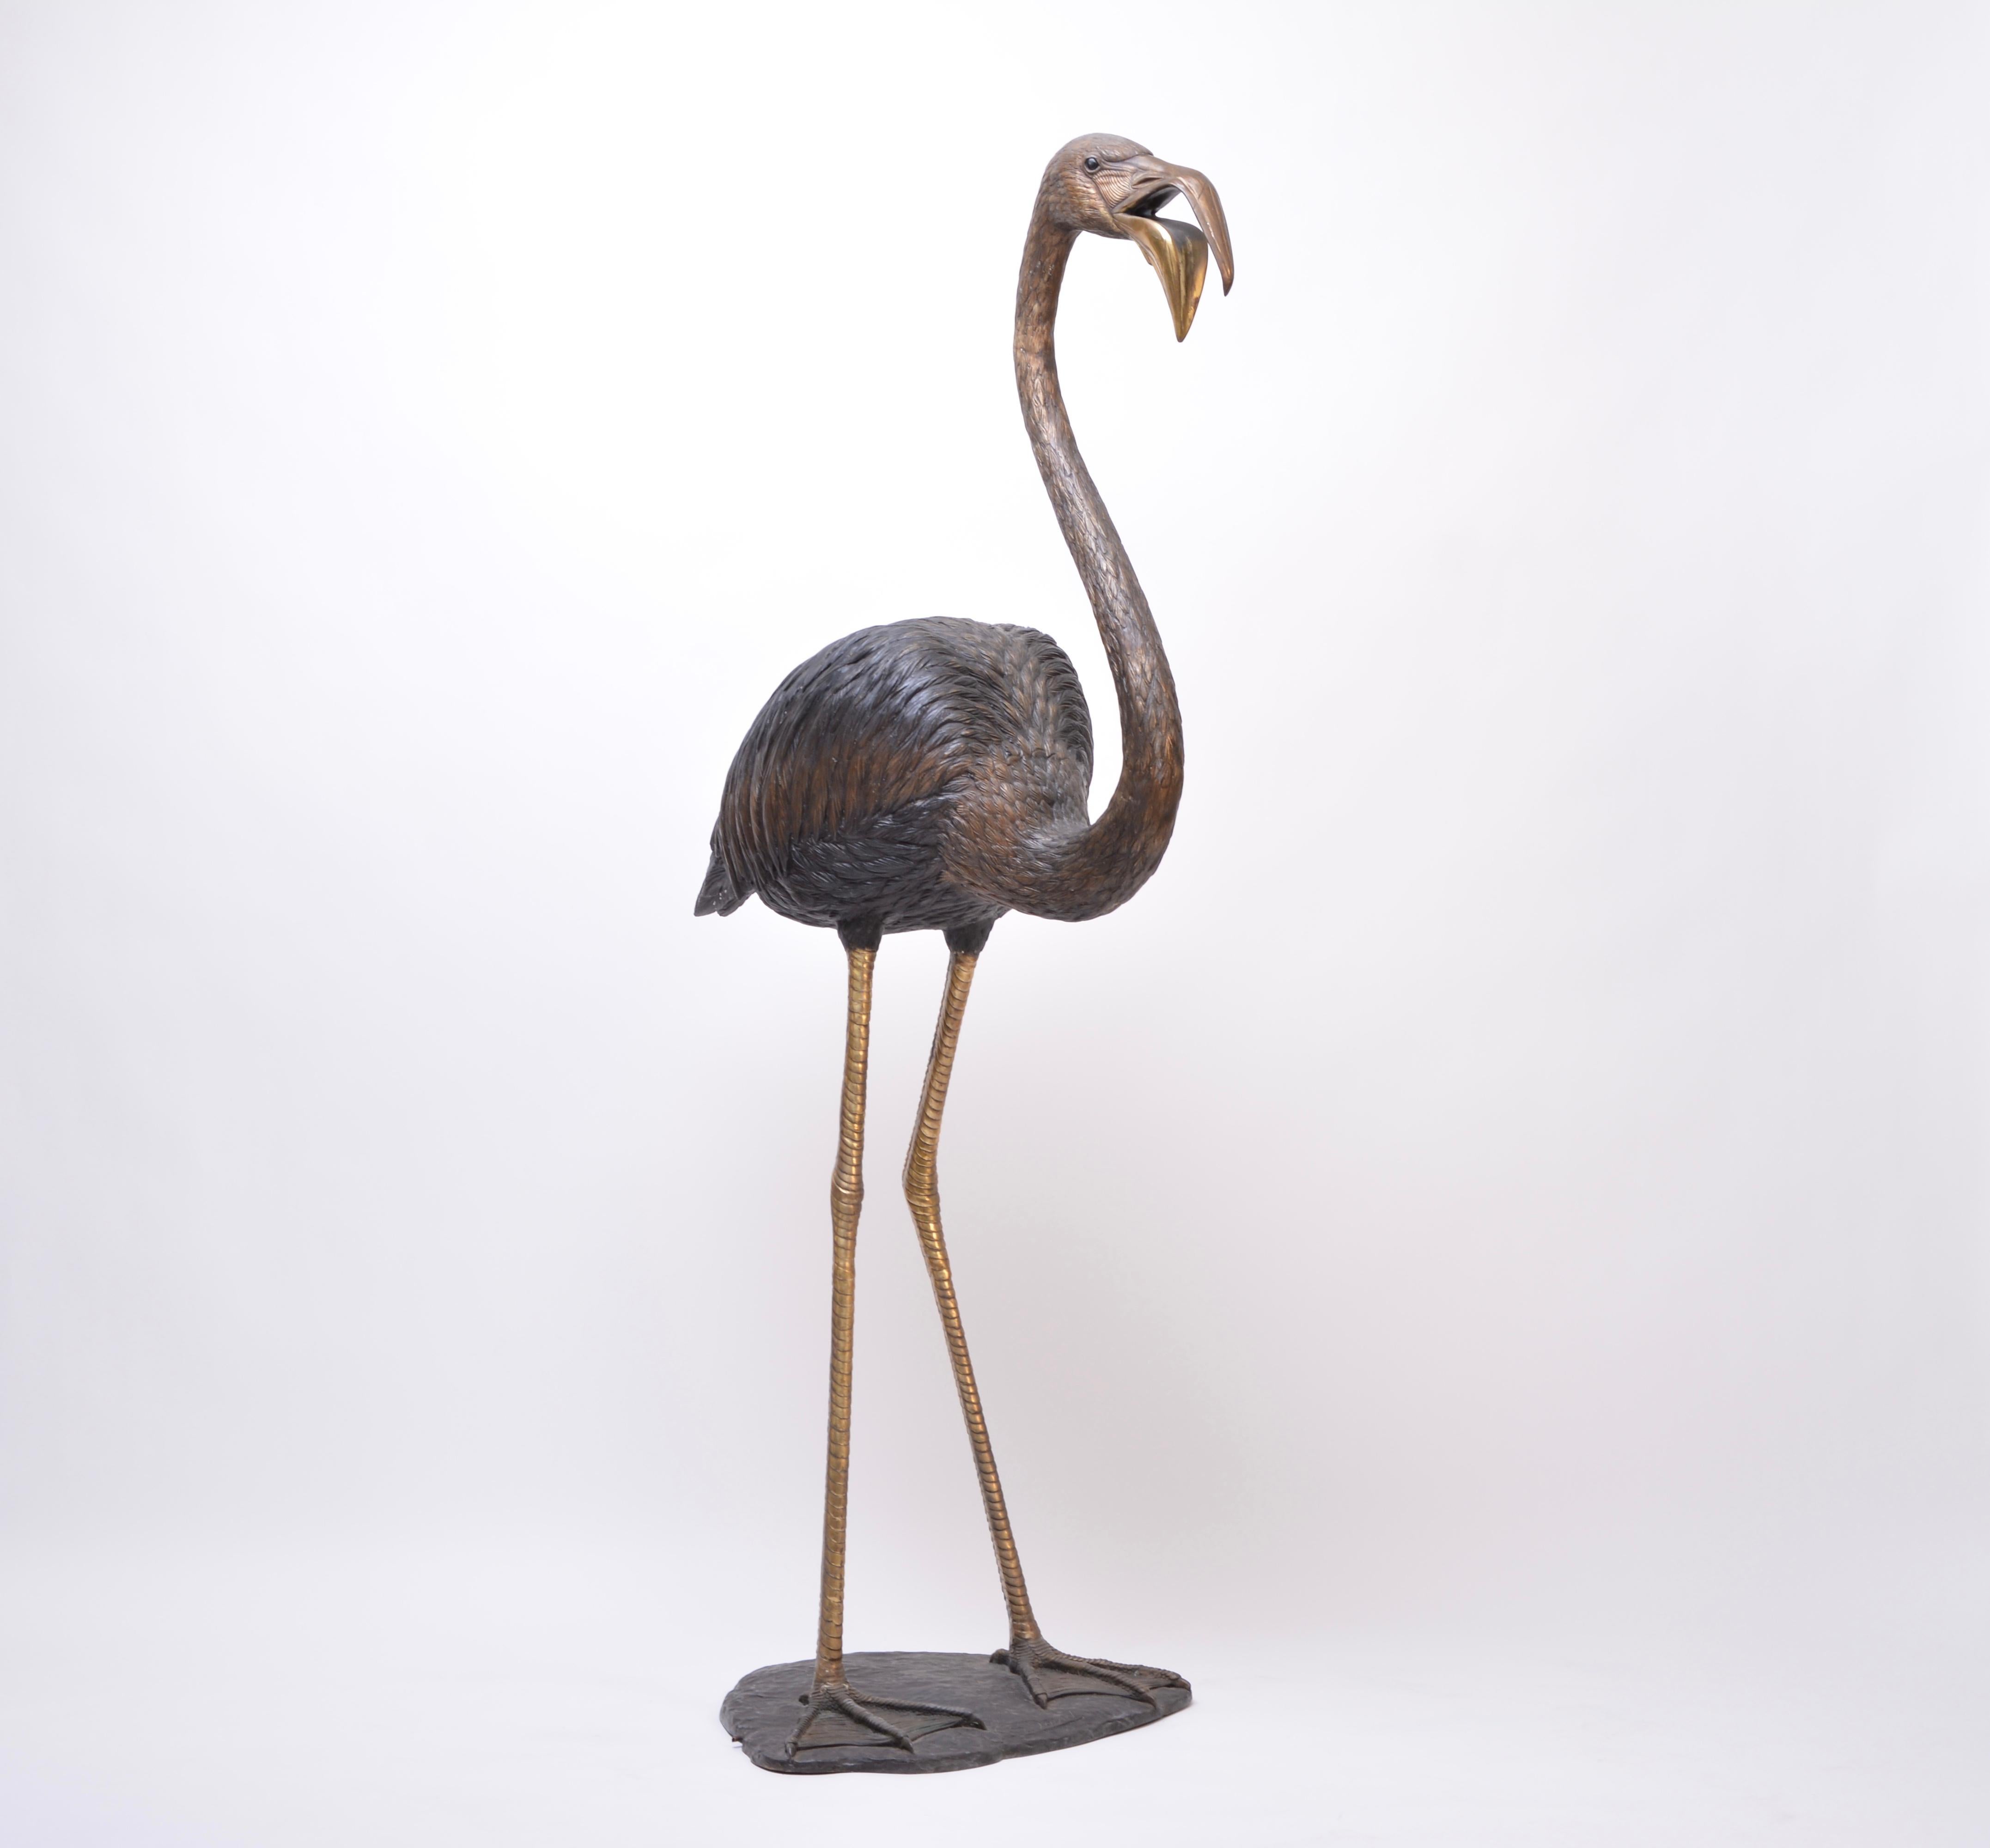 This huge flamingo figure is made of bronze. It is signed on the base S. David. The figure can be used as a water spout.